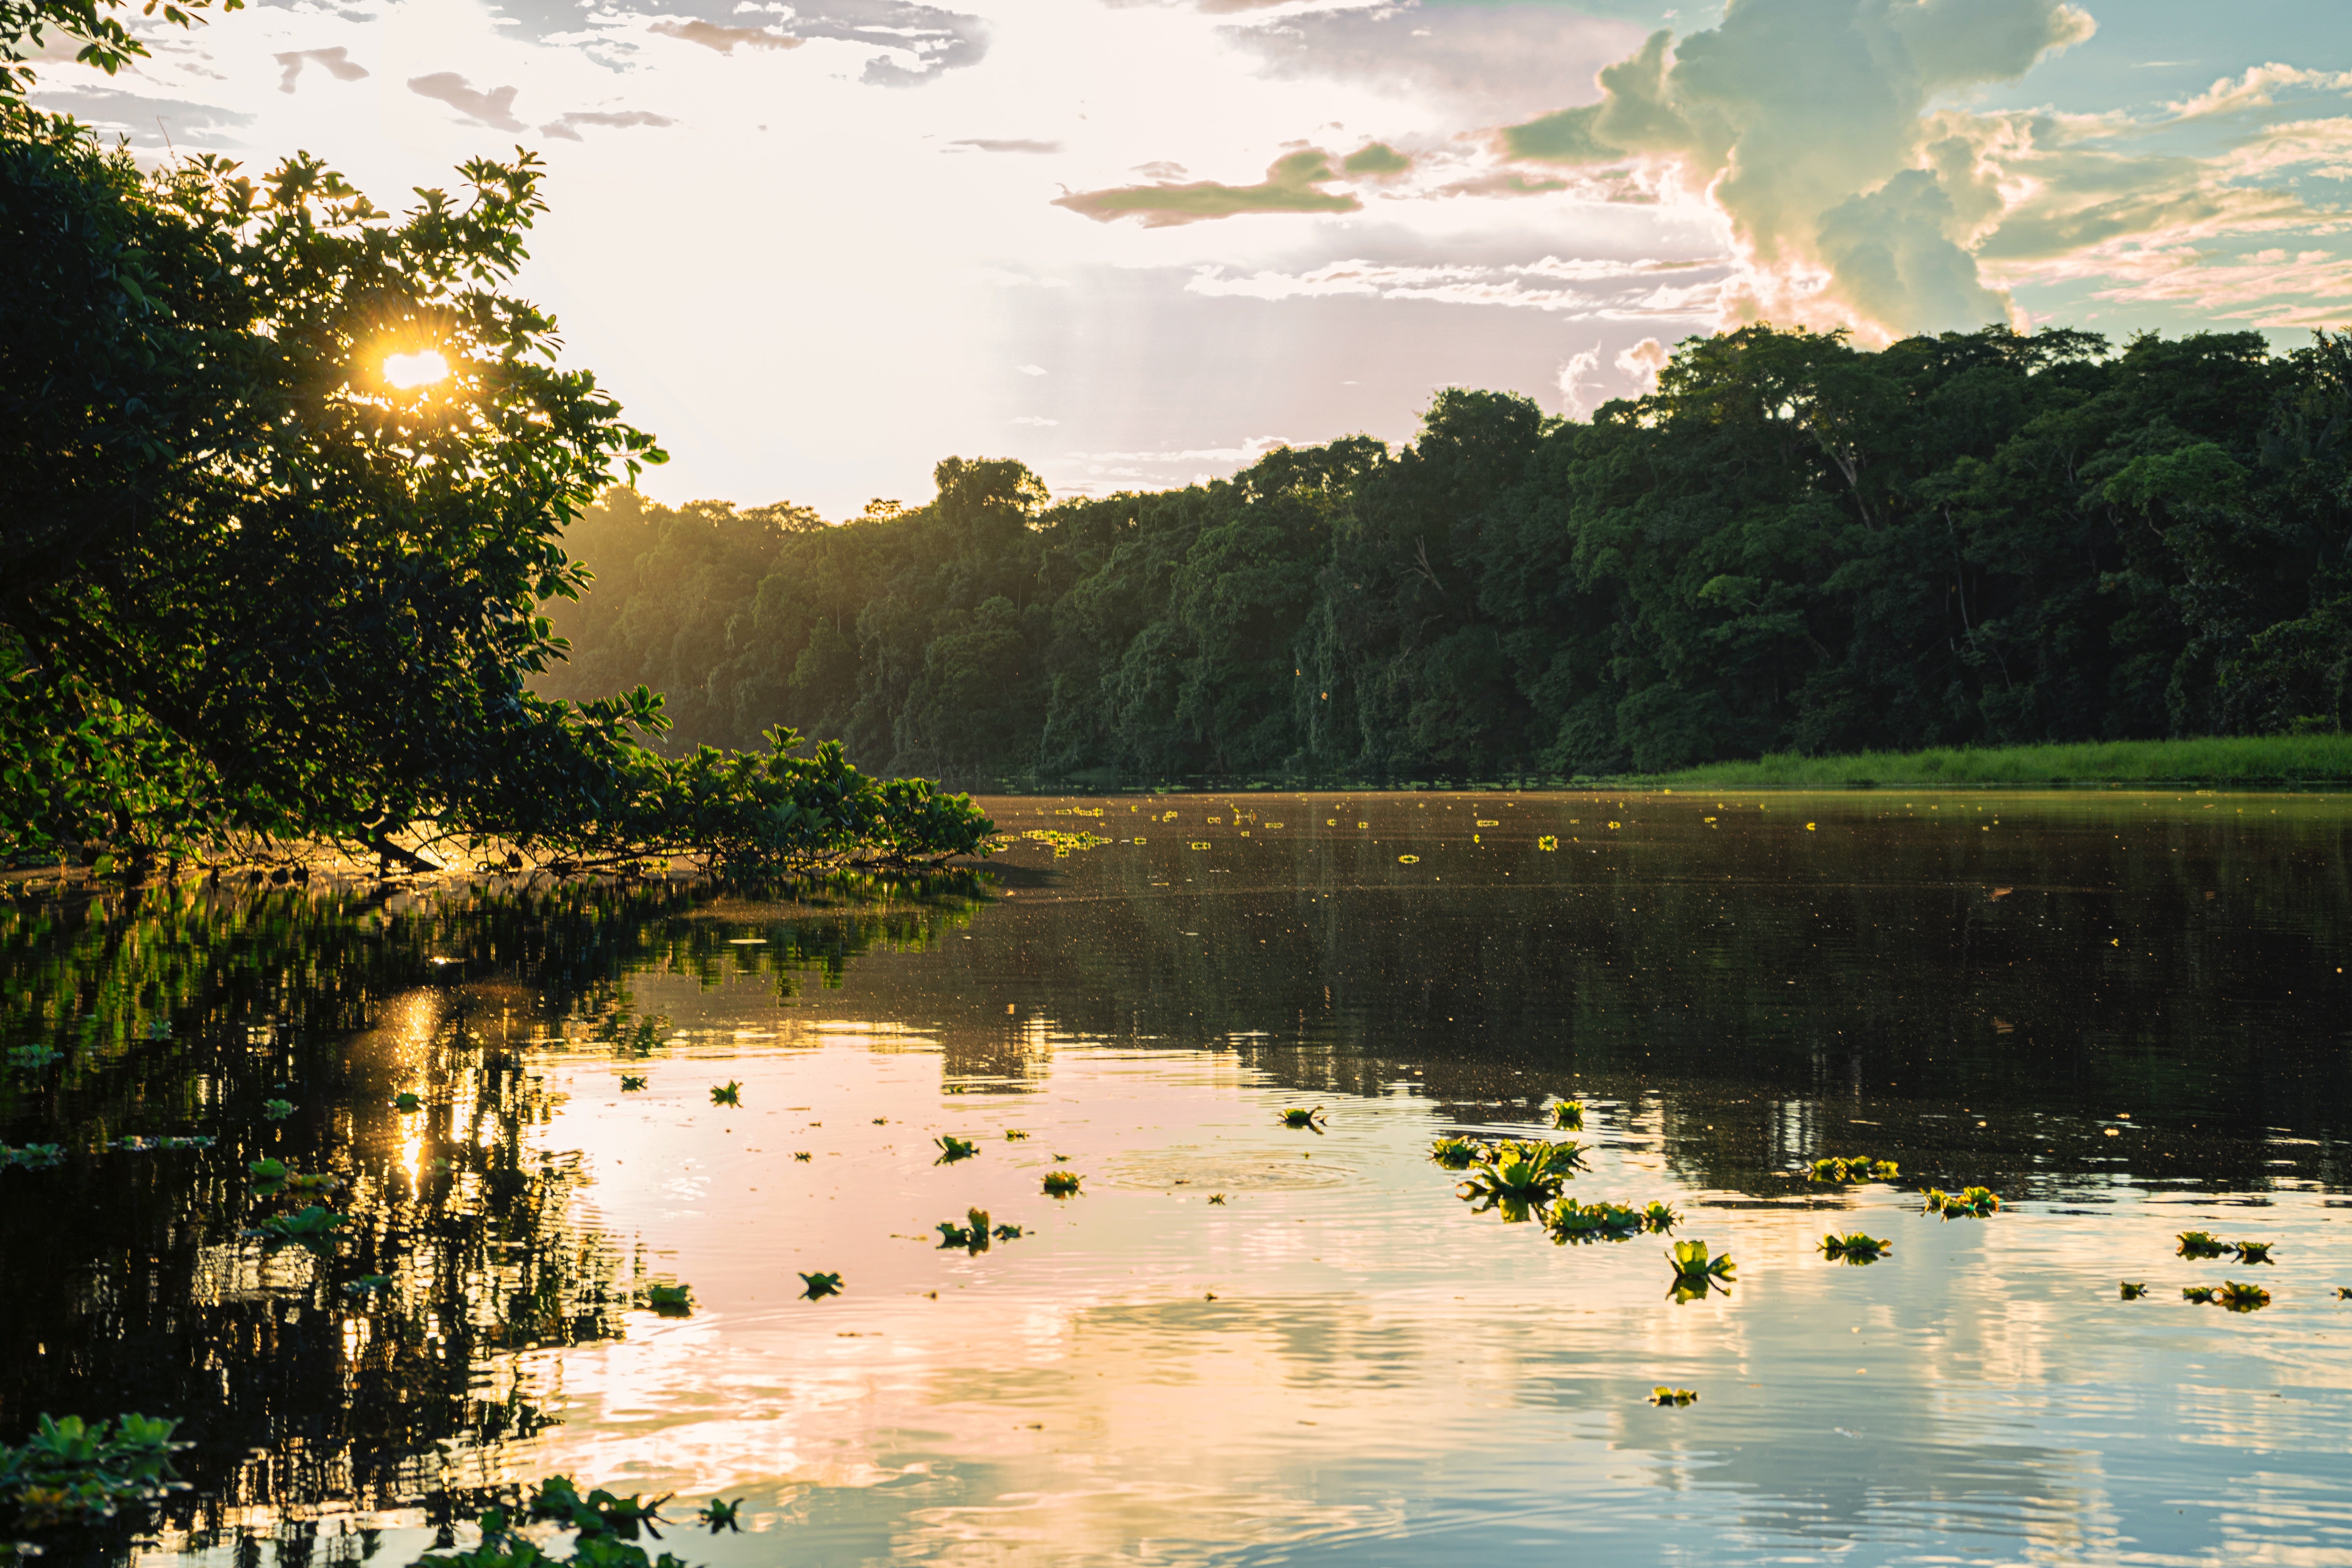 The Amazon is home to various lakes, such as Nueva Loja